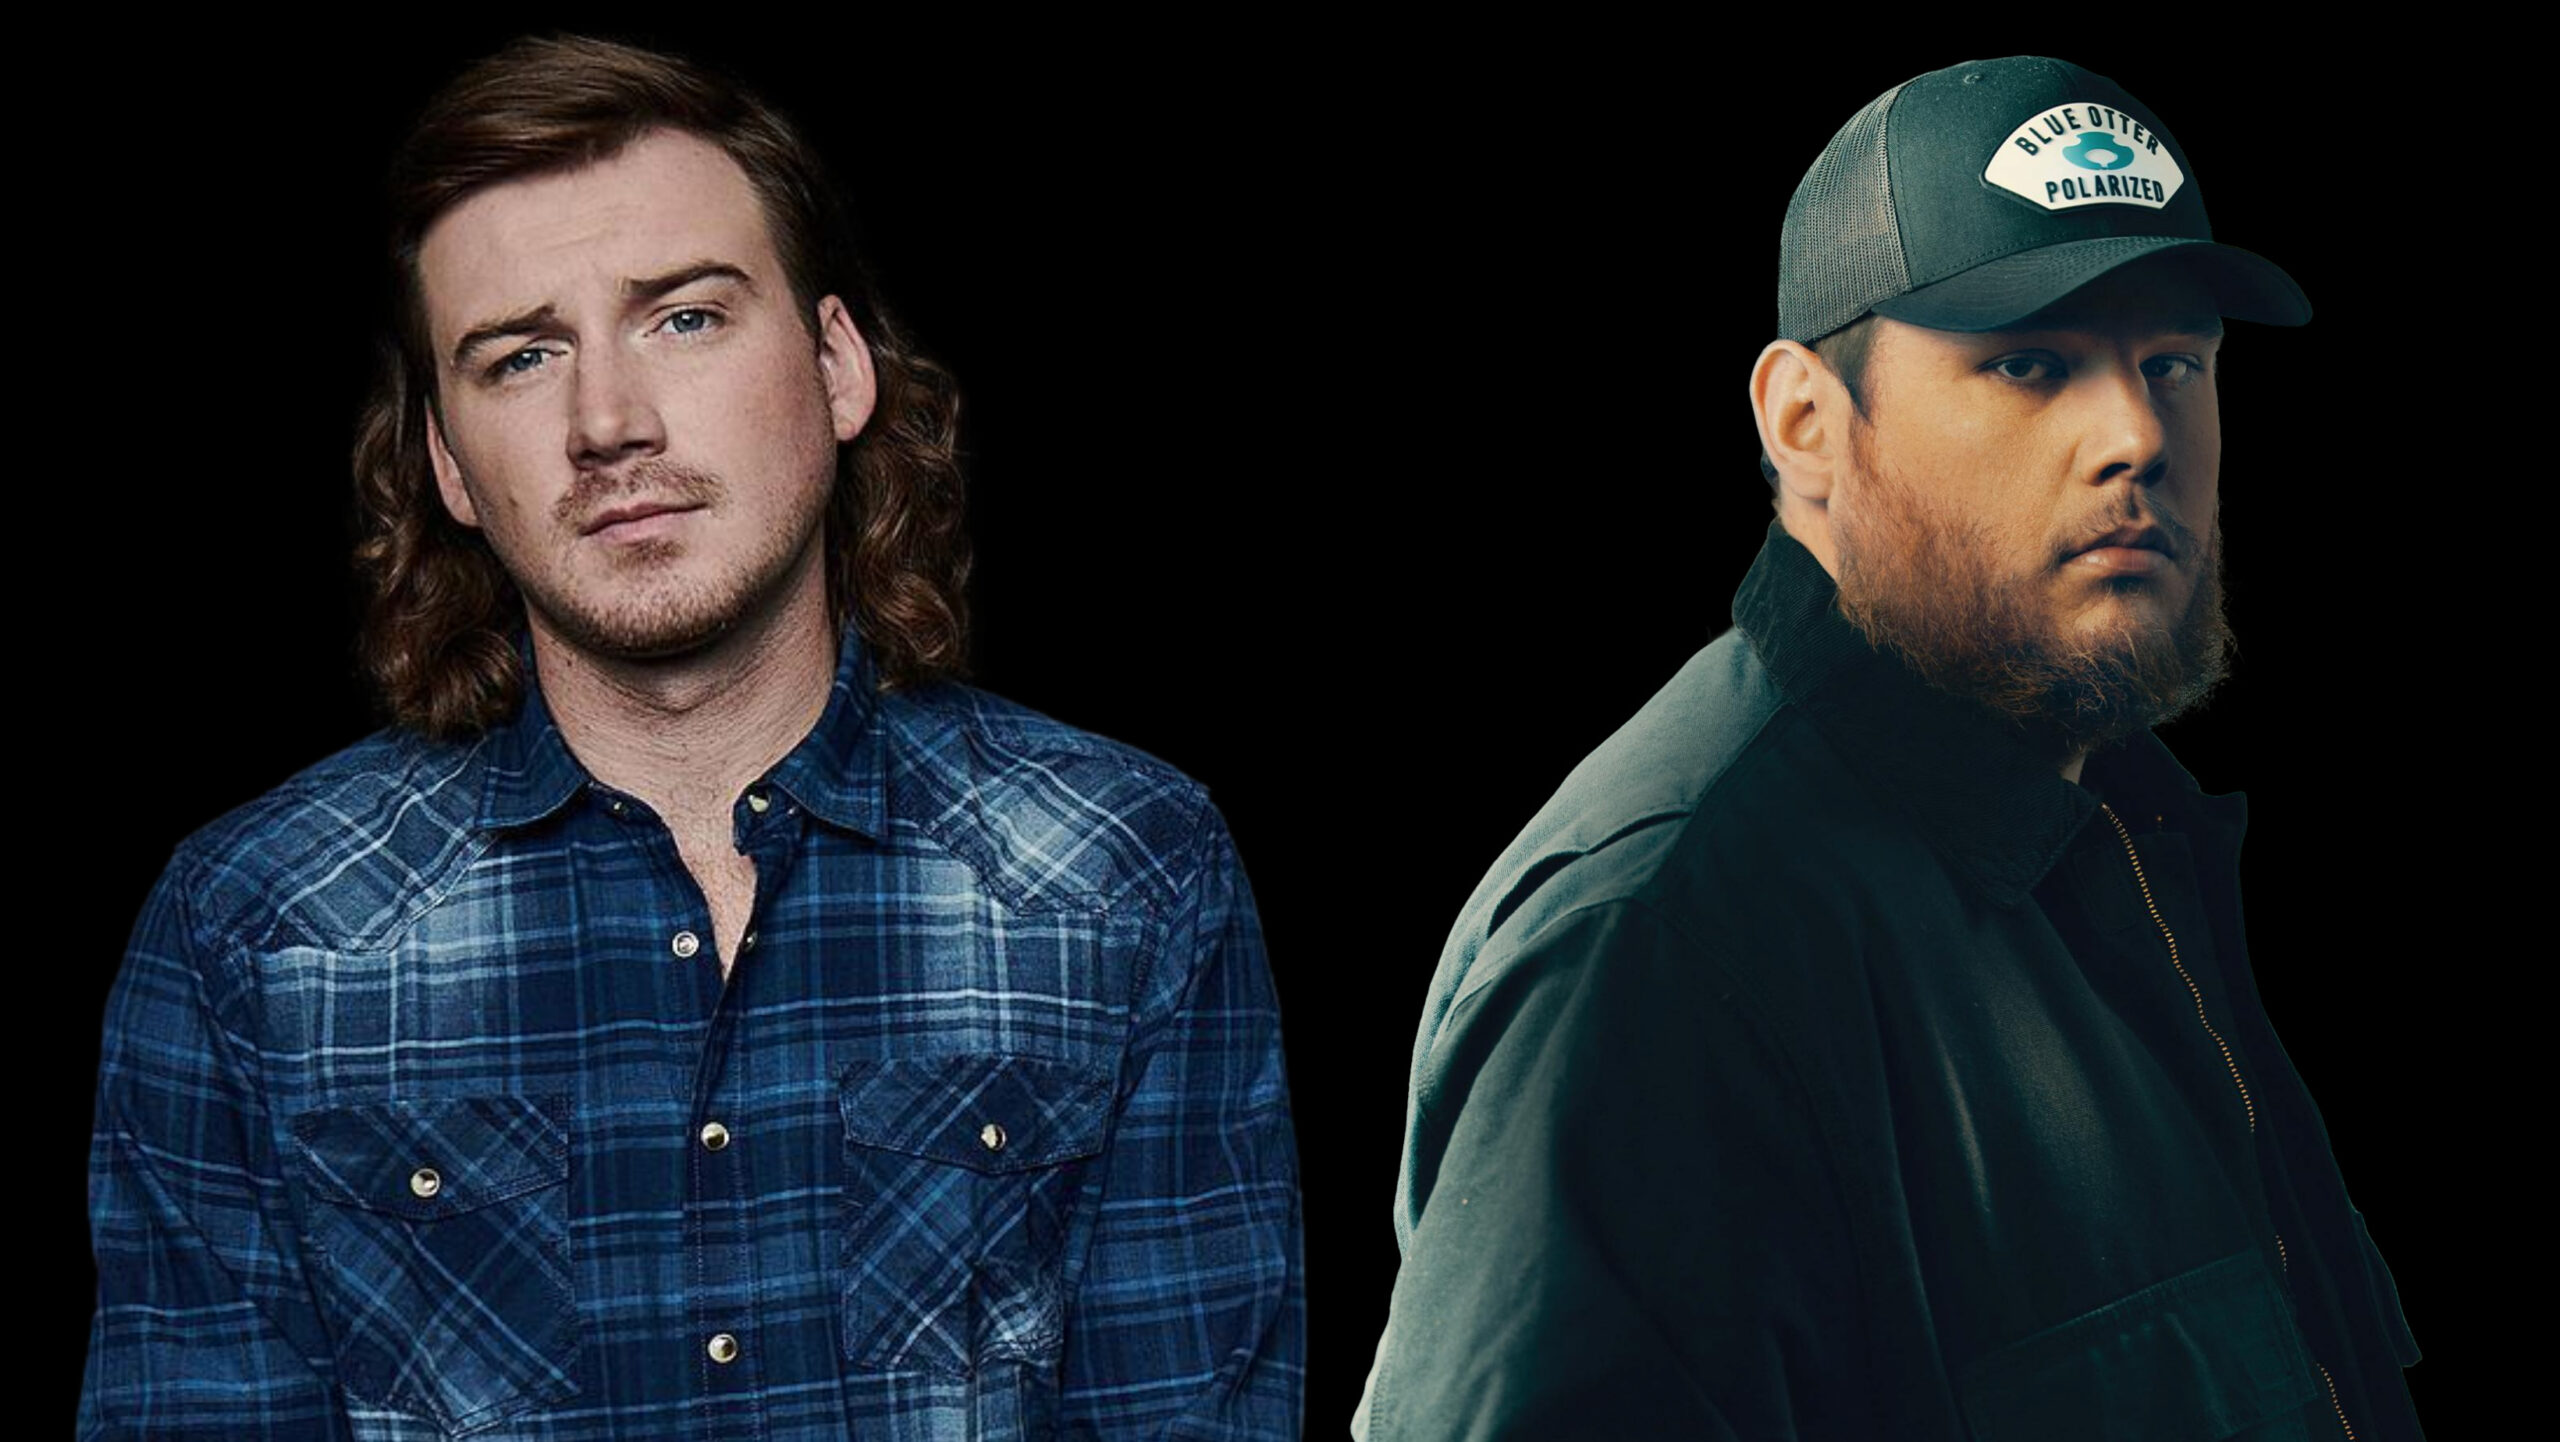 Wallen & Luke Combs take Country Music to 1 and 2 on Hot 100